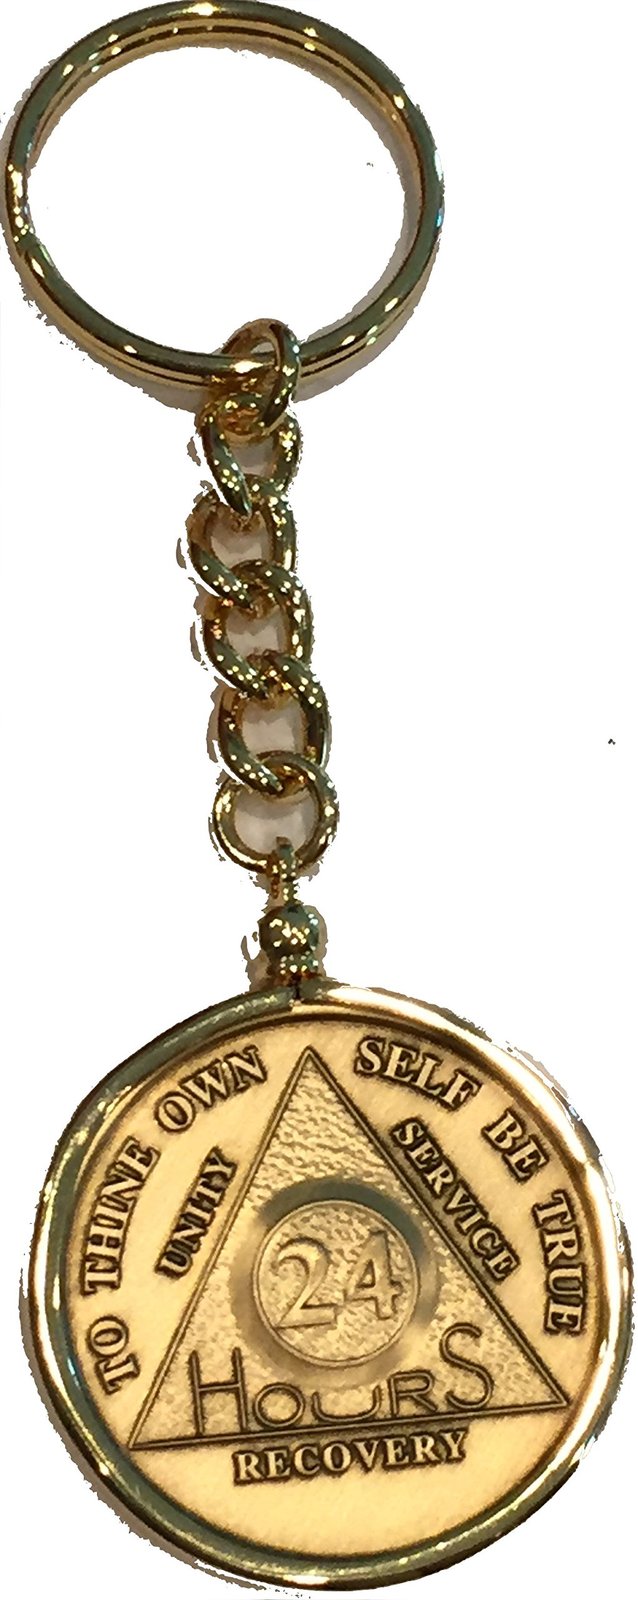 24 Hours AA Serenity Prayer Medallion Keychain Chip Holder Gold Plated